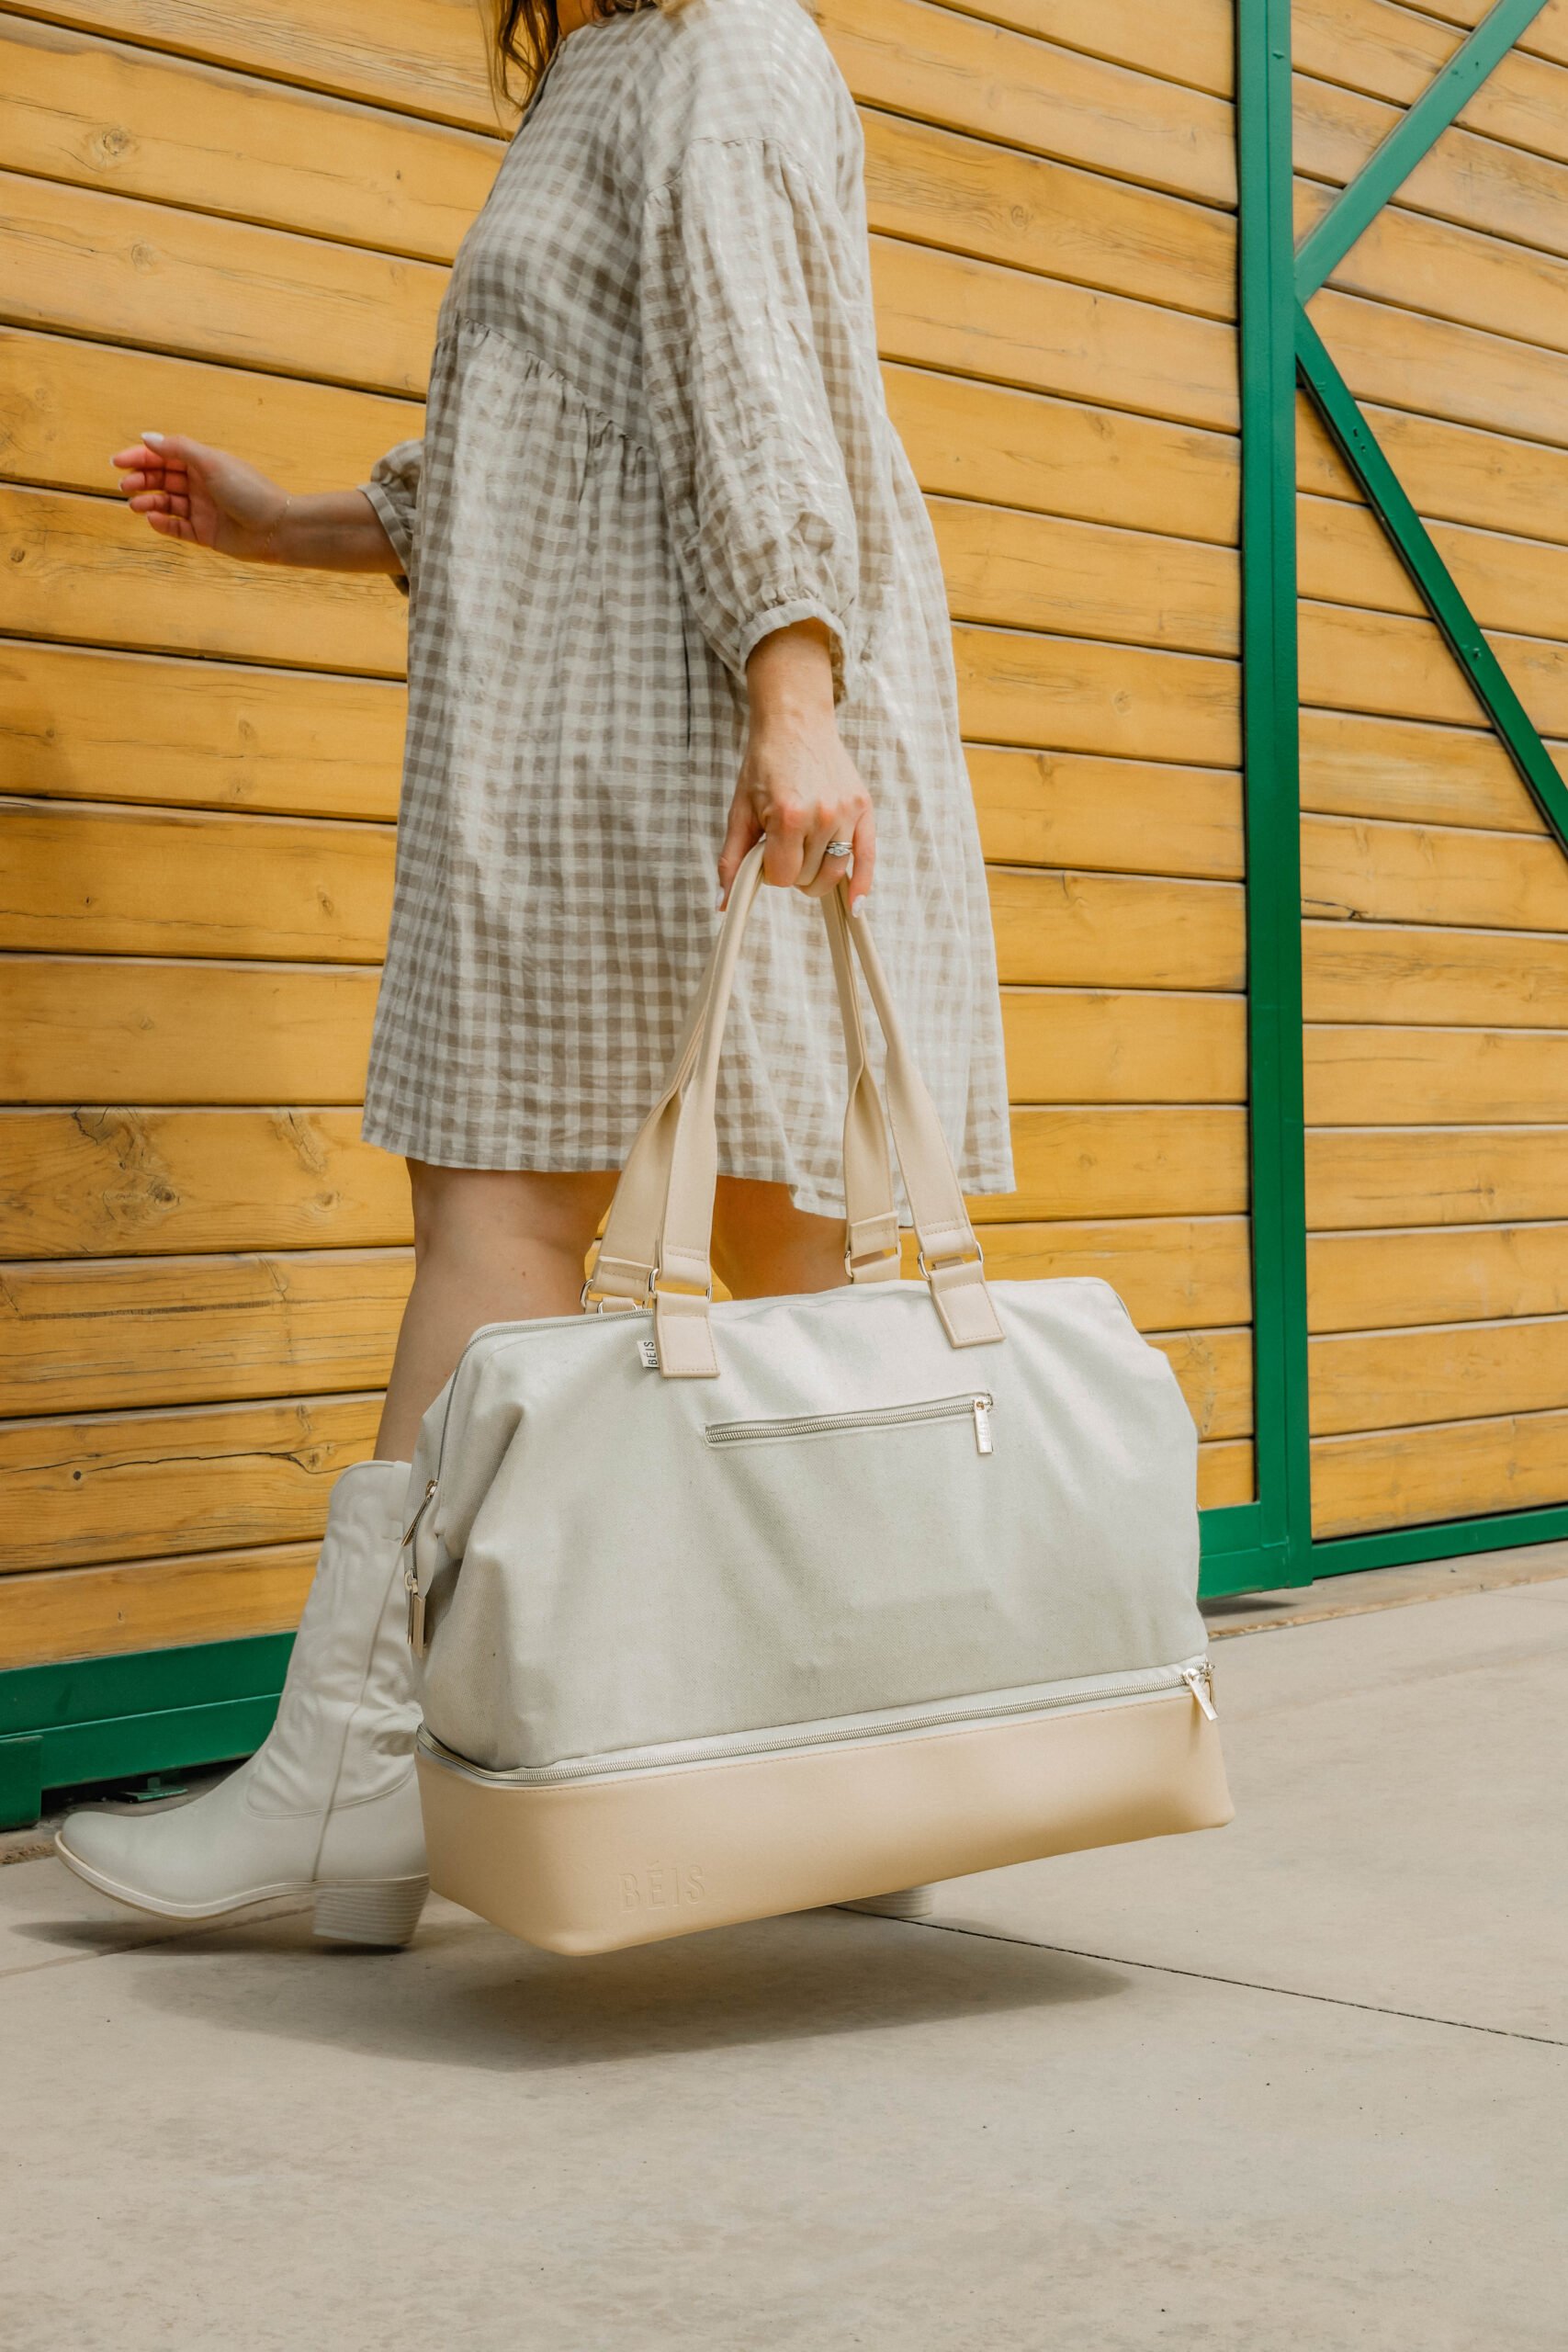 Getting ready for your next trip? This is the ultimate list of travel essentials for women that you'll be glad you packed for short weekend trips or longer vacations!